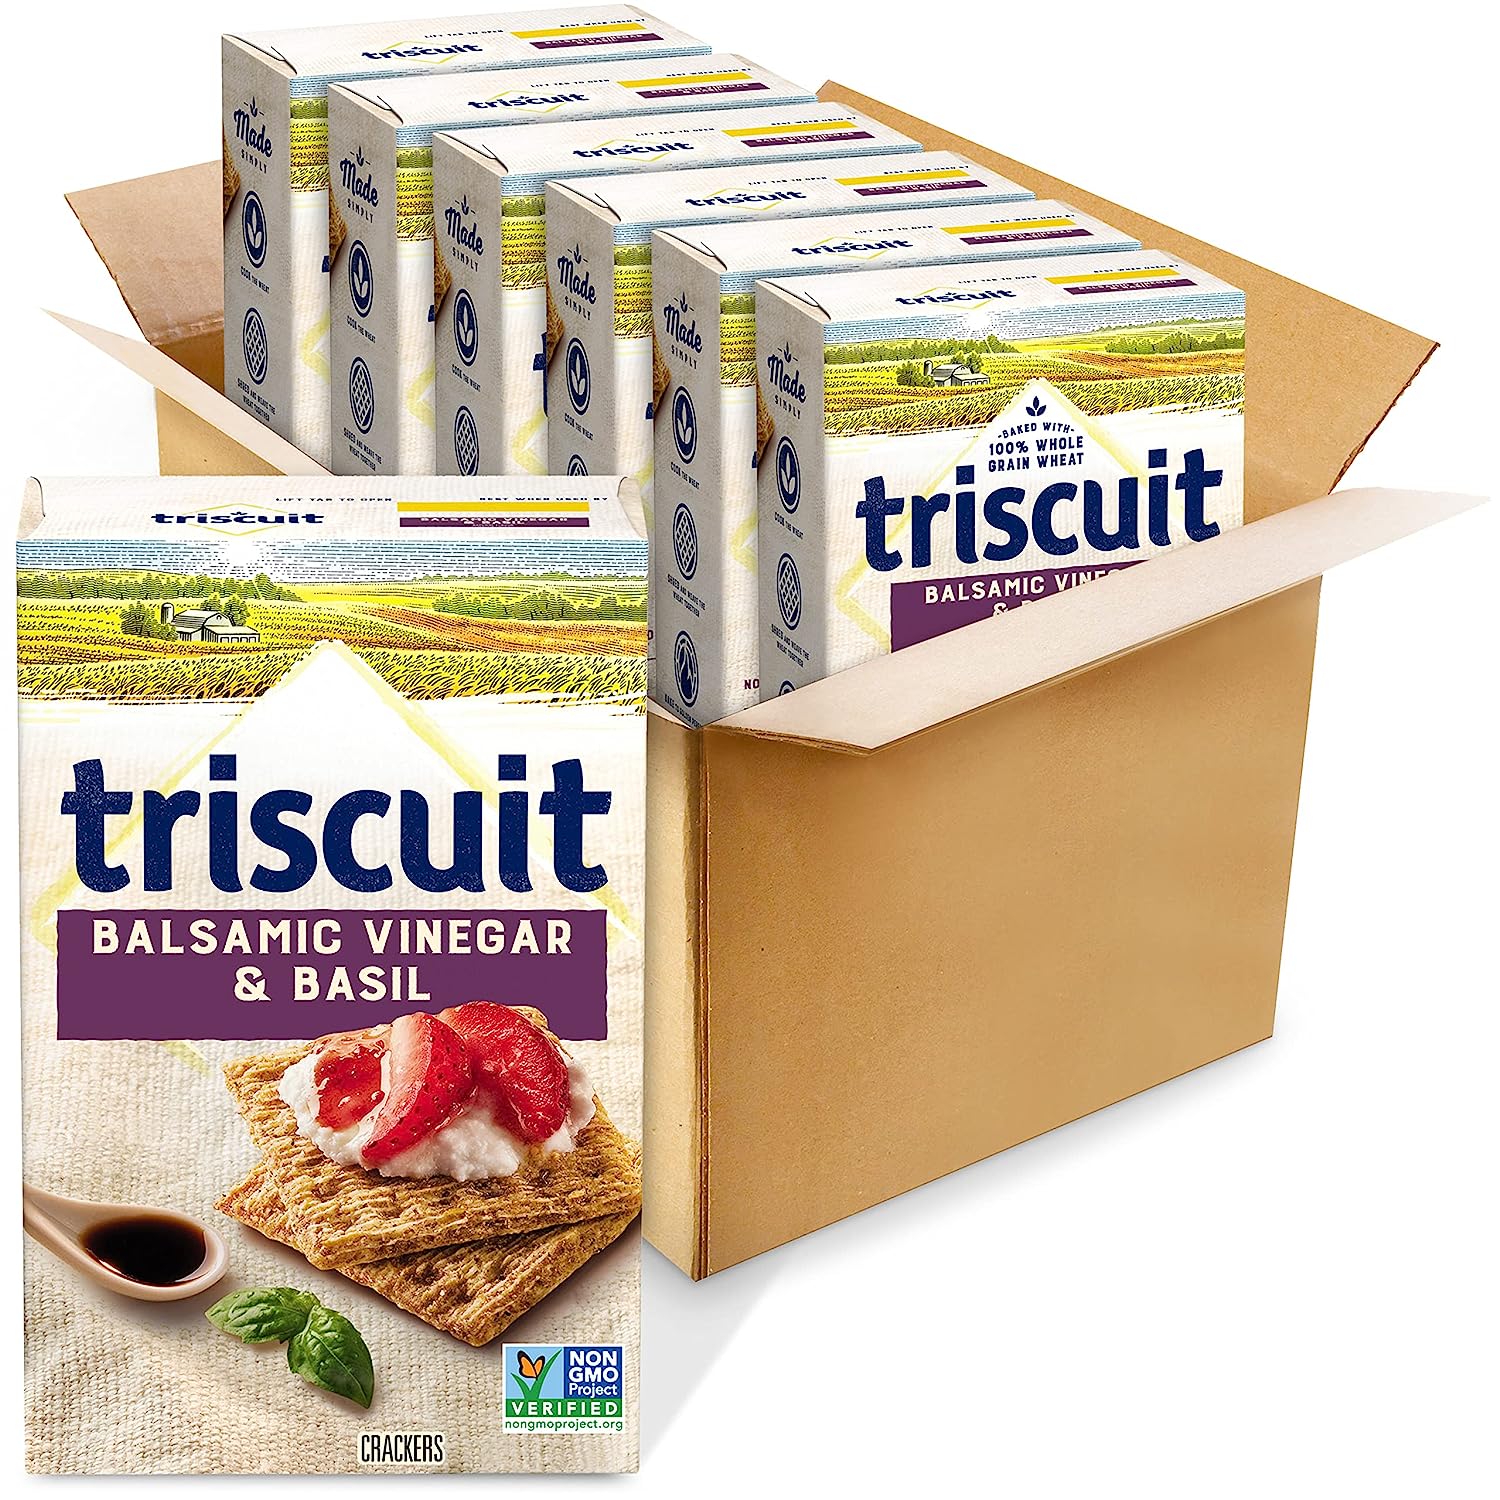 6-Pack 8.5-Oz Triscuit Non-GMO Whole Grain Crackers (Balsamic Vinegar & Basil or Hint of Salt) $11.35 w/ S&S + Free S&H w/ Prime or $25+